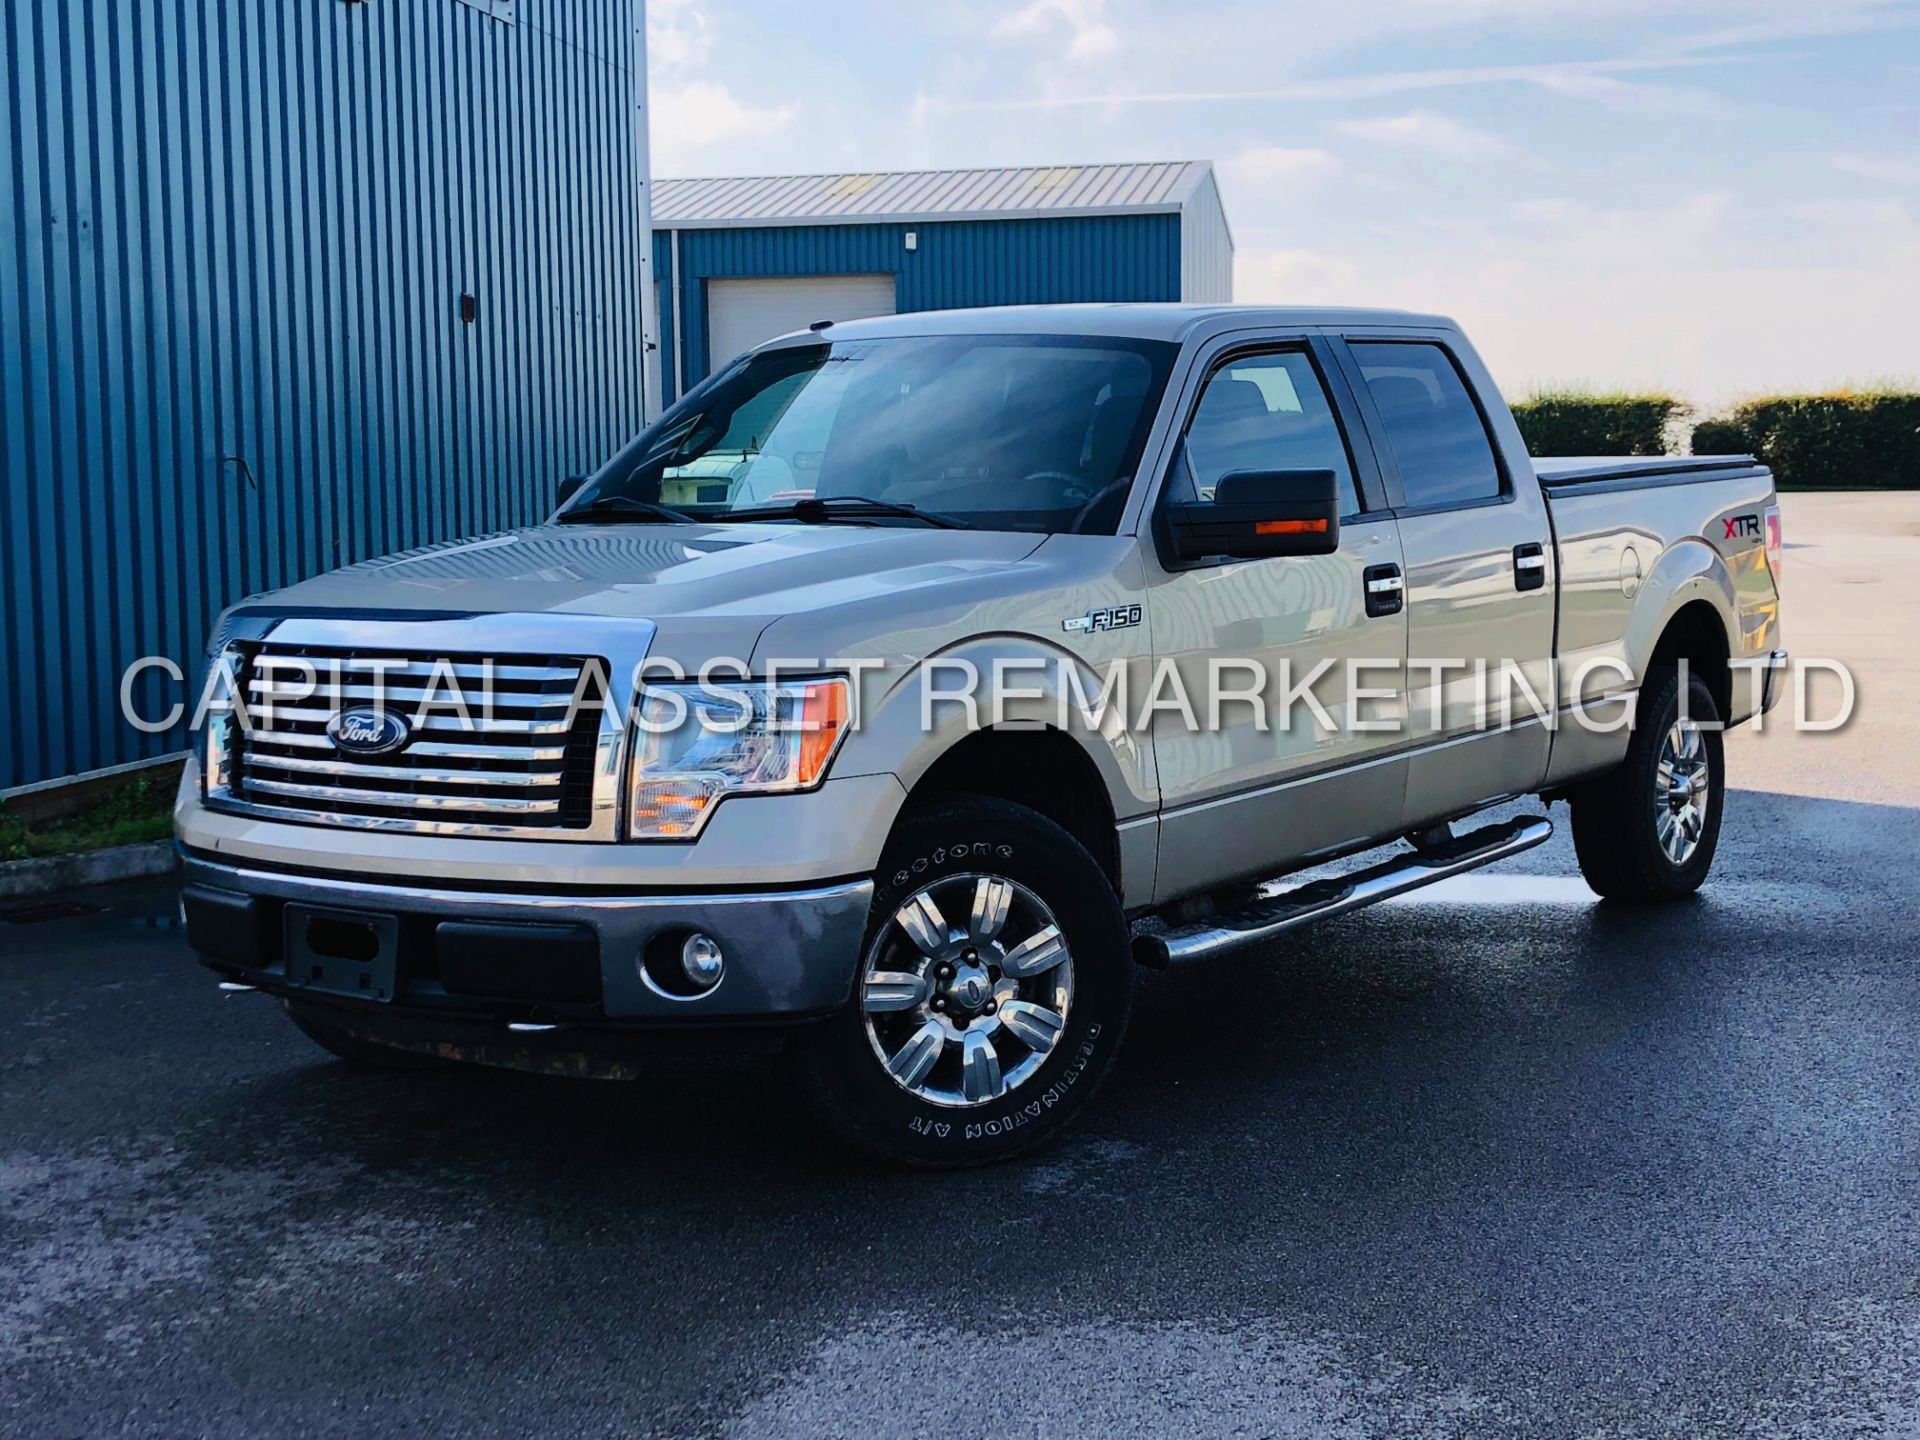 (ON SALE) FORD F-150 *XTR /EDITION* SUPER CREW CAB PICK-UP (2010) '4.6L V8 - AUTOMATIC'**6 SEAT**4x4 - Image 2 of 53